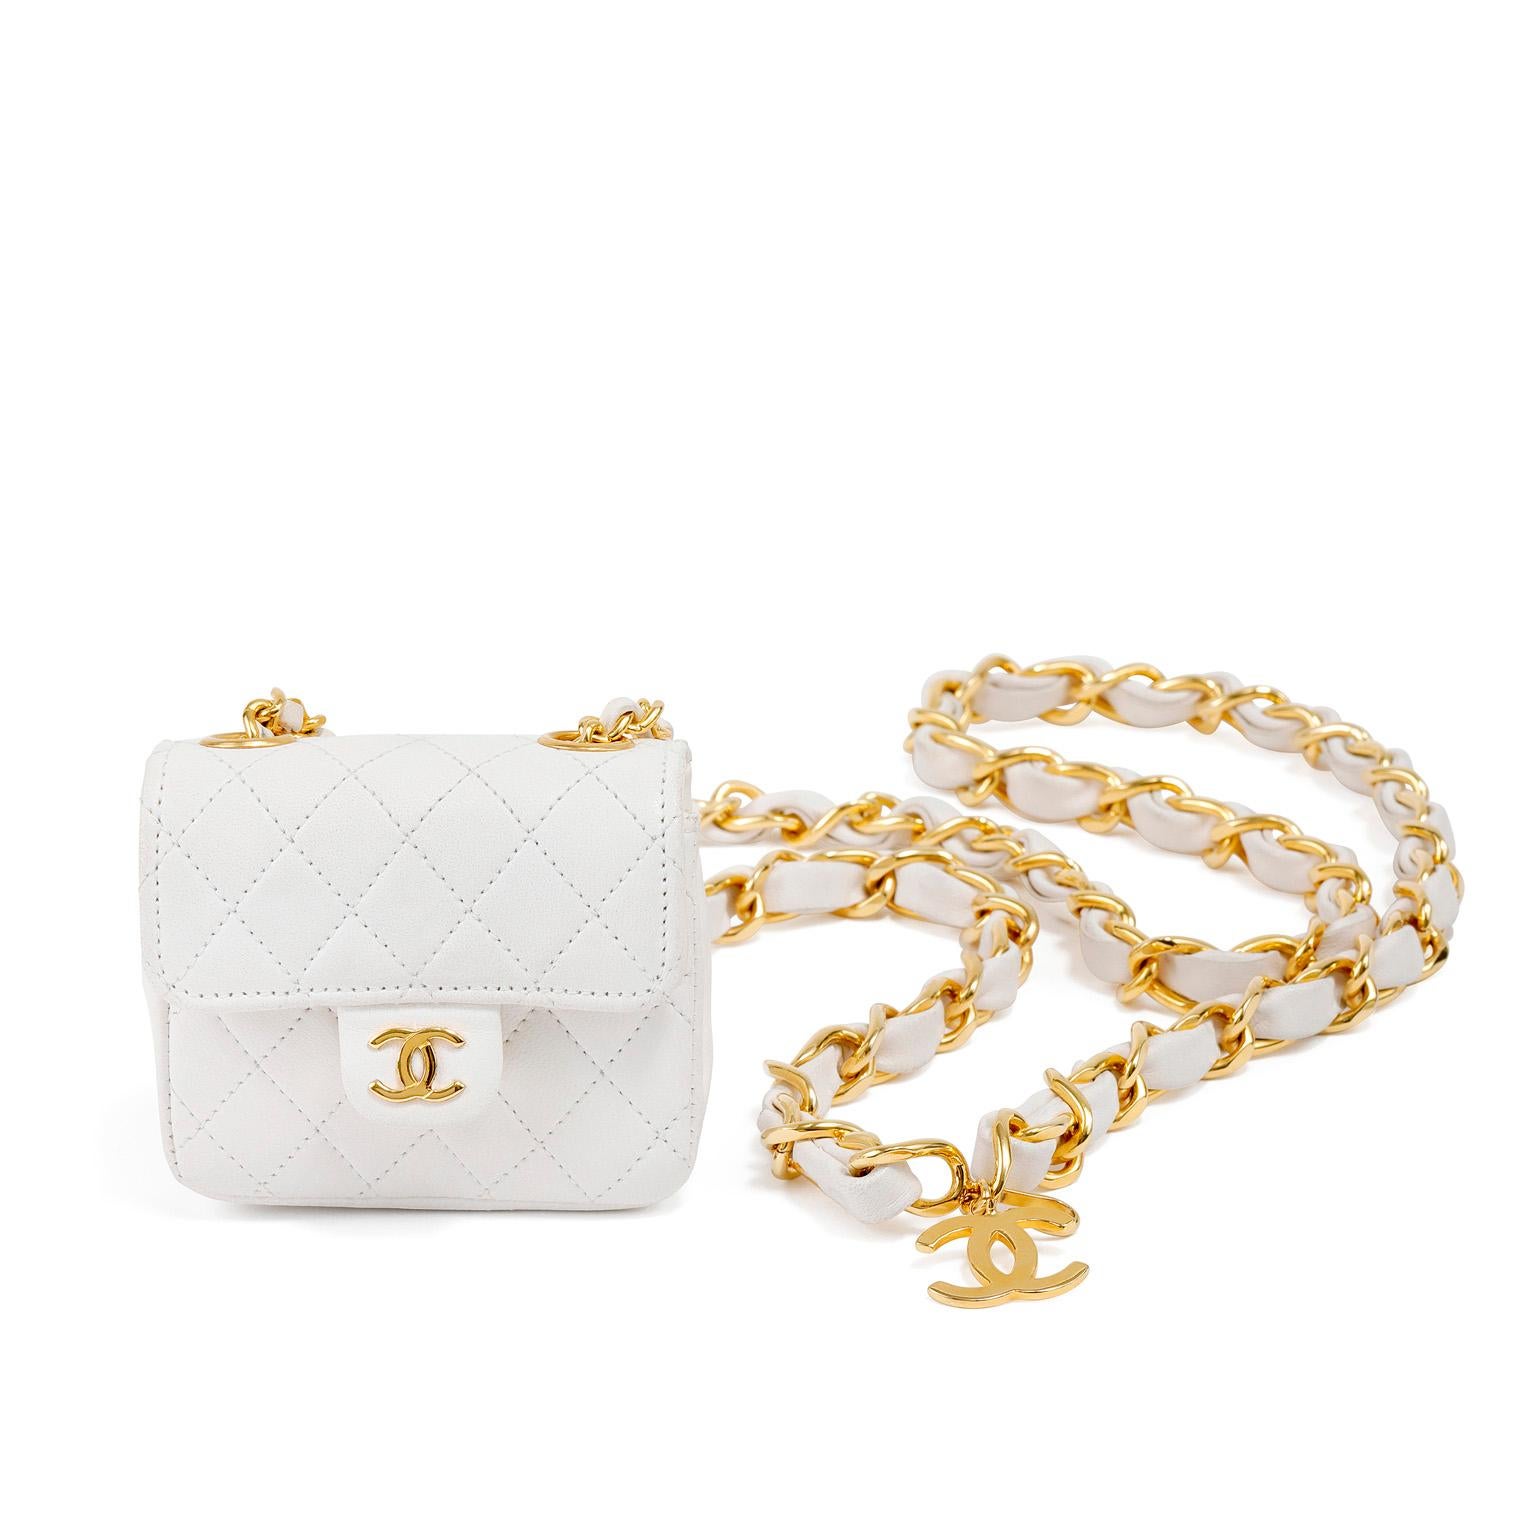 Chanel White Micro Bag Chain Belt  In Excellent Condition For Sale In Palm Beach, FL